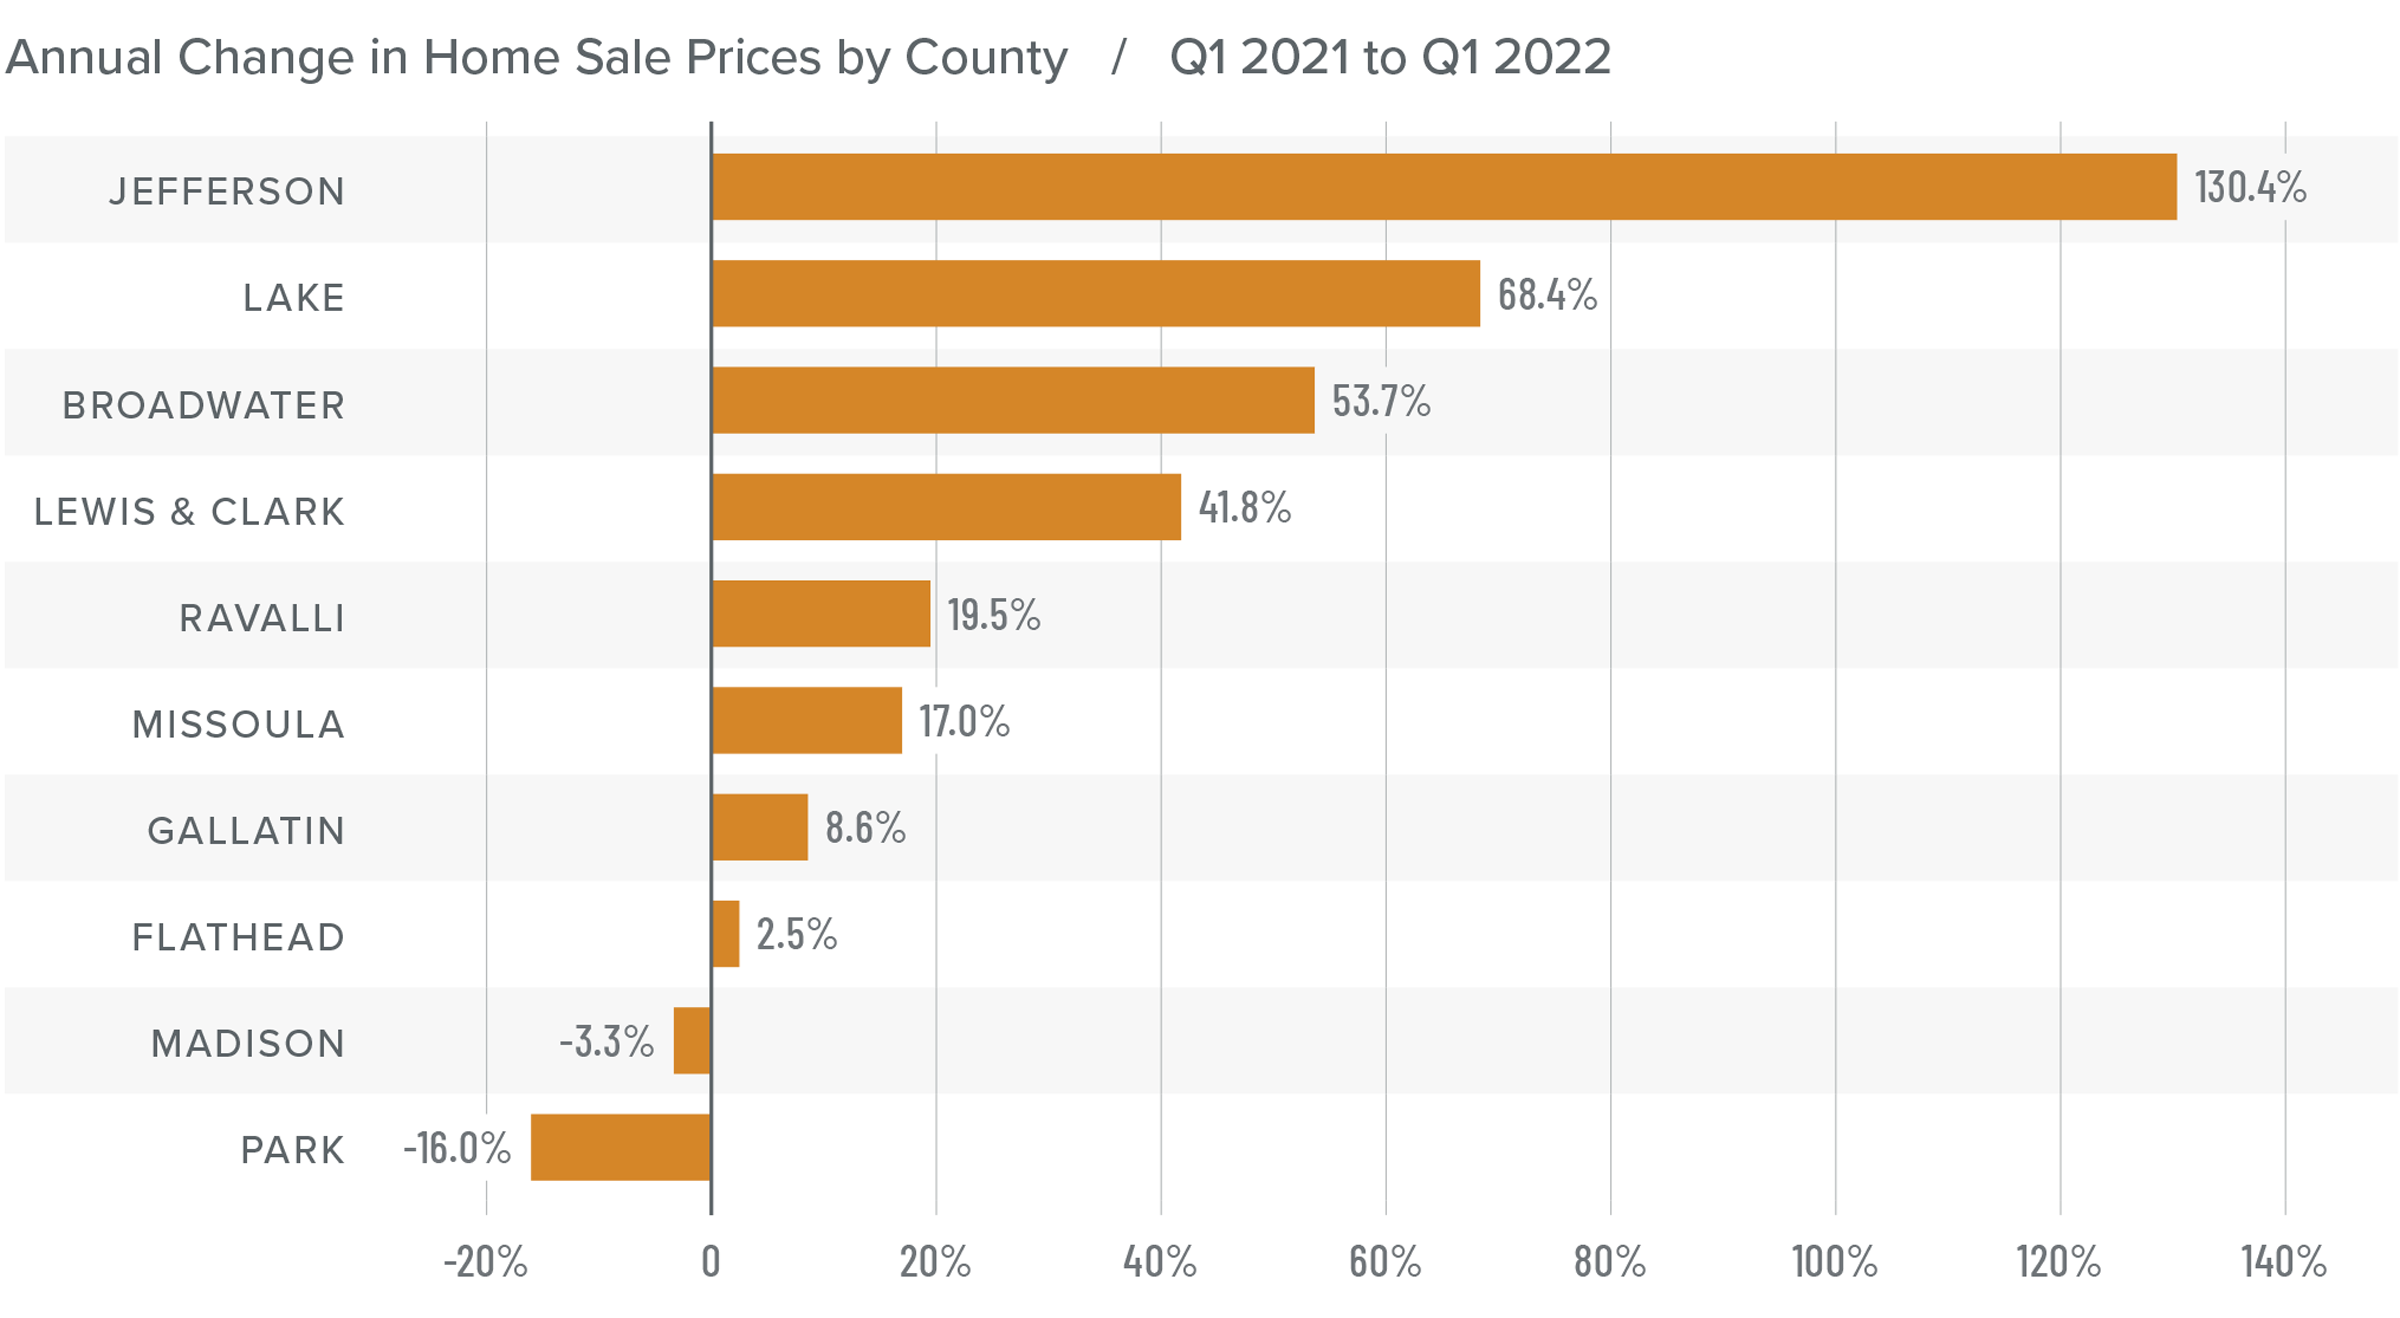 A bar graph showing the annual change in home sale prices for various counties in Montana from Q1 2021 to Q1 2022.